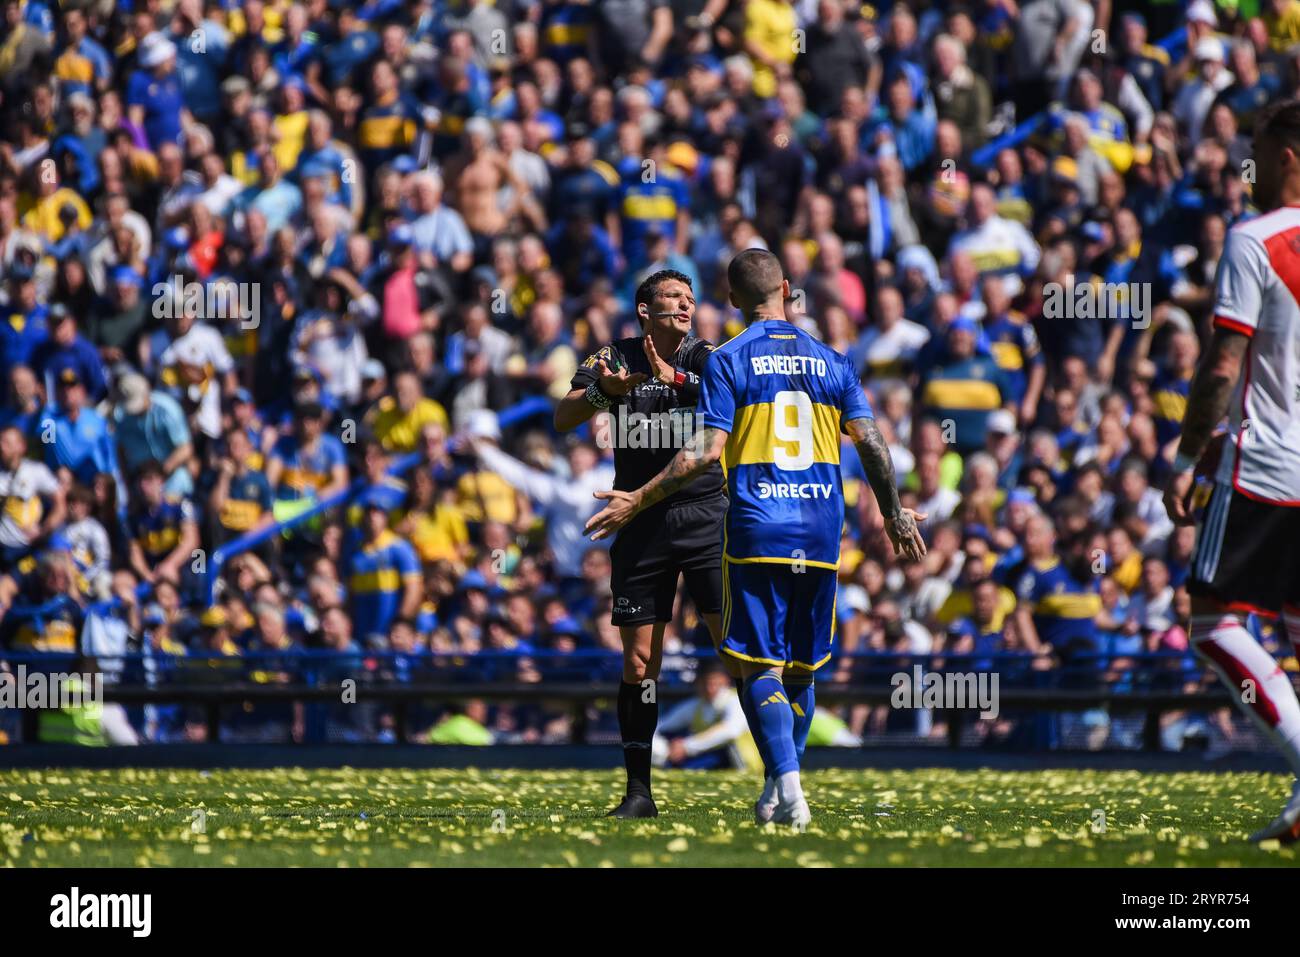 Buenos Aires, Argentina. 01st Oct, 2023. Dario Pipa Benedetto aof CA Boca Juniors. Andres Merlos referee during the Liga Argentina match between CA Boca Juniors and River Plate played at La Bombonera Stadium on October 1, 2023 in Buenos Aires, Spain. (Photo by Santiago Joel Abdala/PRESSINPHOTO) Credit: PRESSINPHOTO SPORTS AGENCY/Alamy Live News Stock Photo